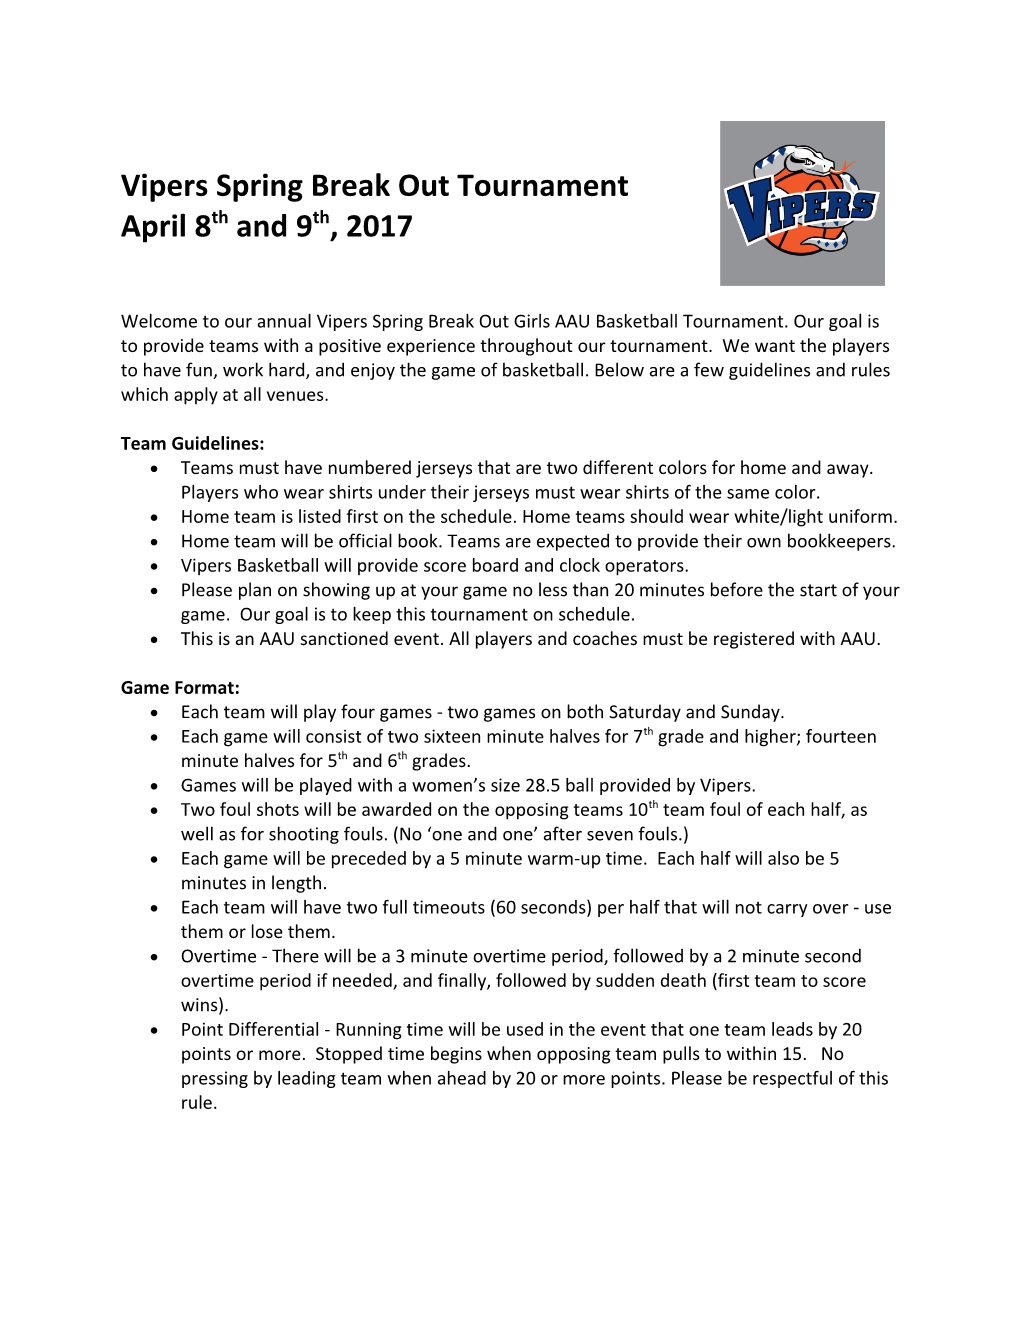 Vipers Spring Break out Tournament